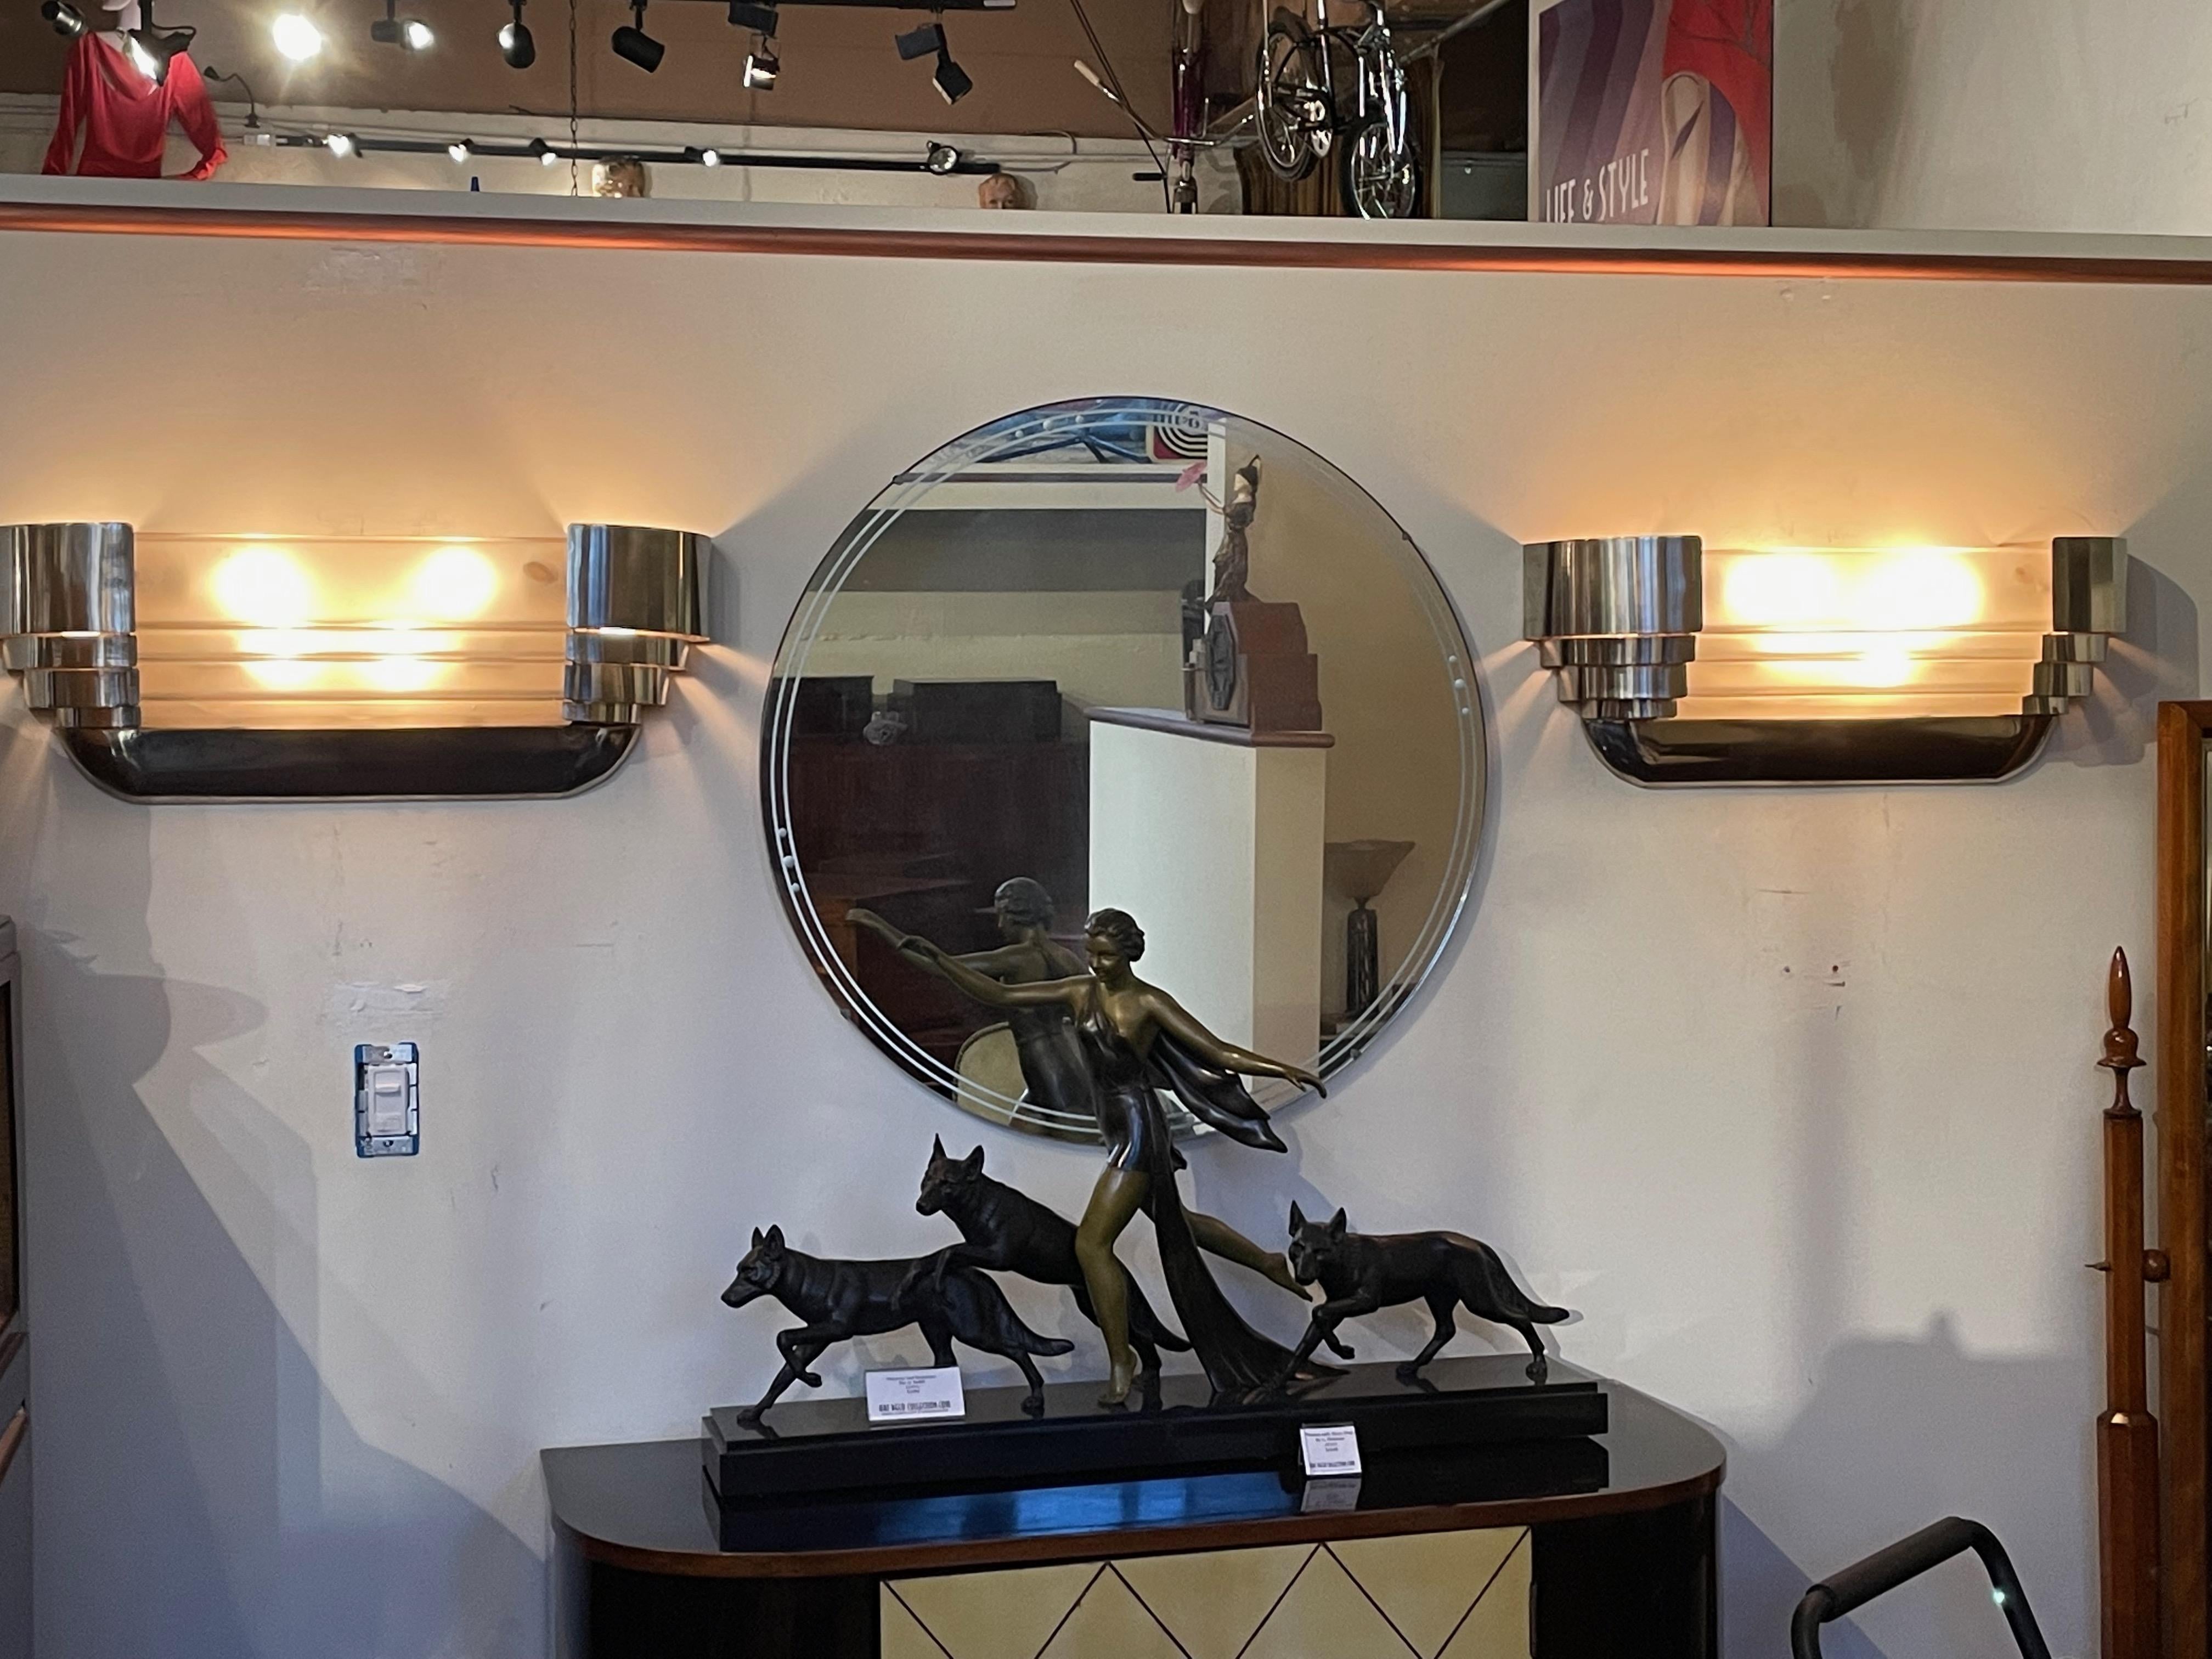 Sabino Art Deco Modernist Stepped Original chrome Sconces circa the 1930s. Rare pair of frosted Sabino glass sconces with unusual stepped metal treatment has mirrored echo design in the metalwork both in the forward design and the outside ribbed